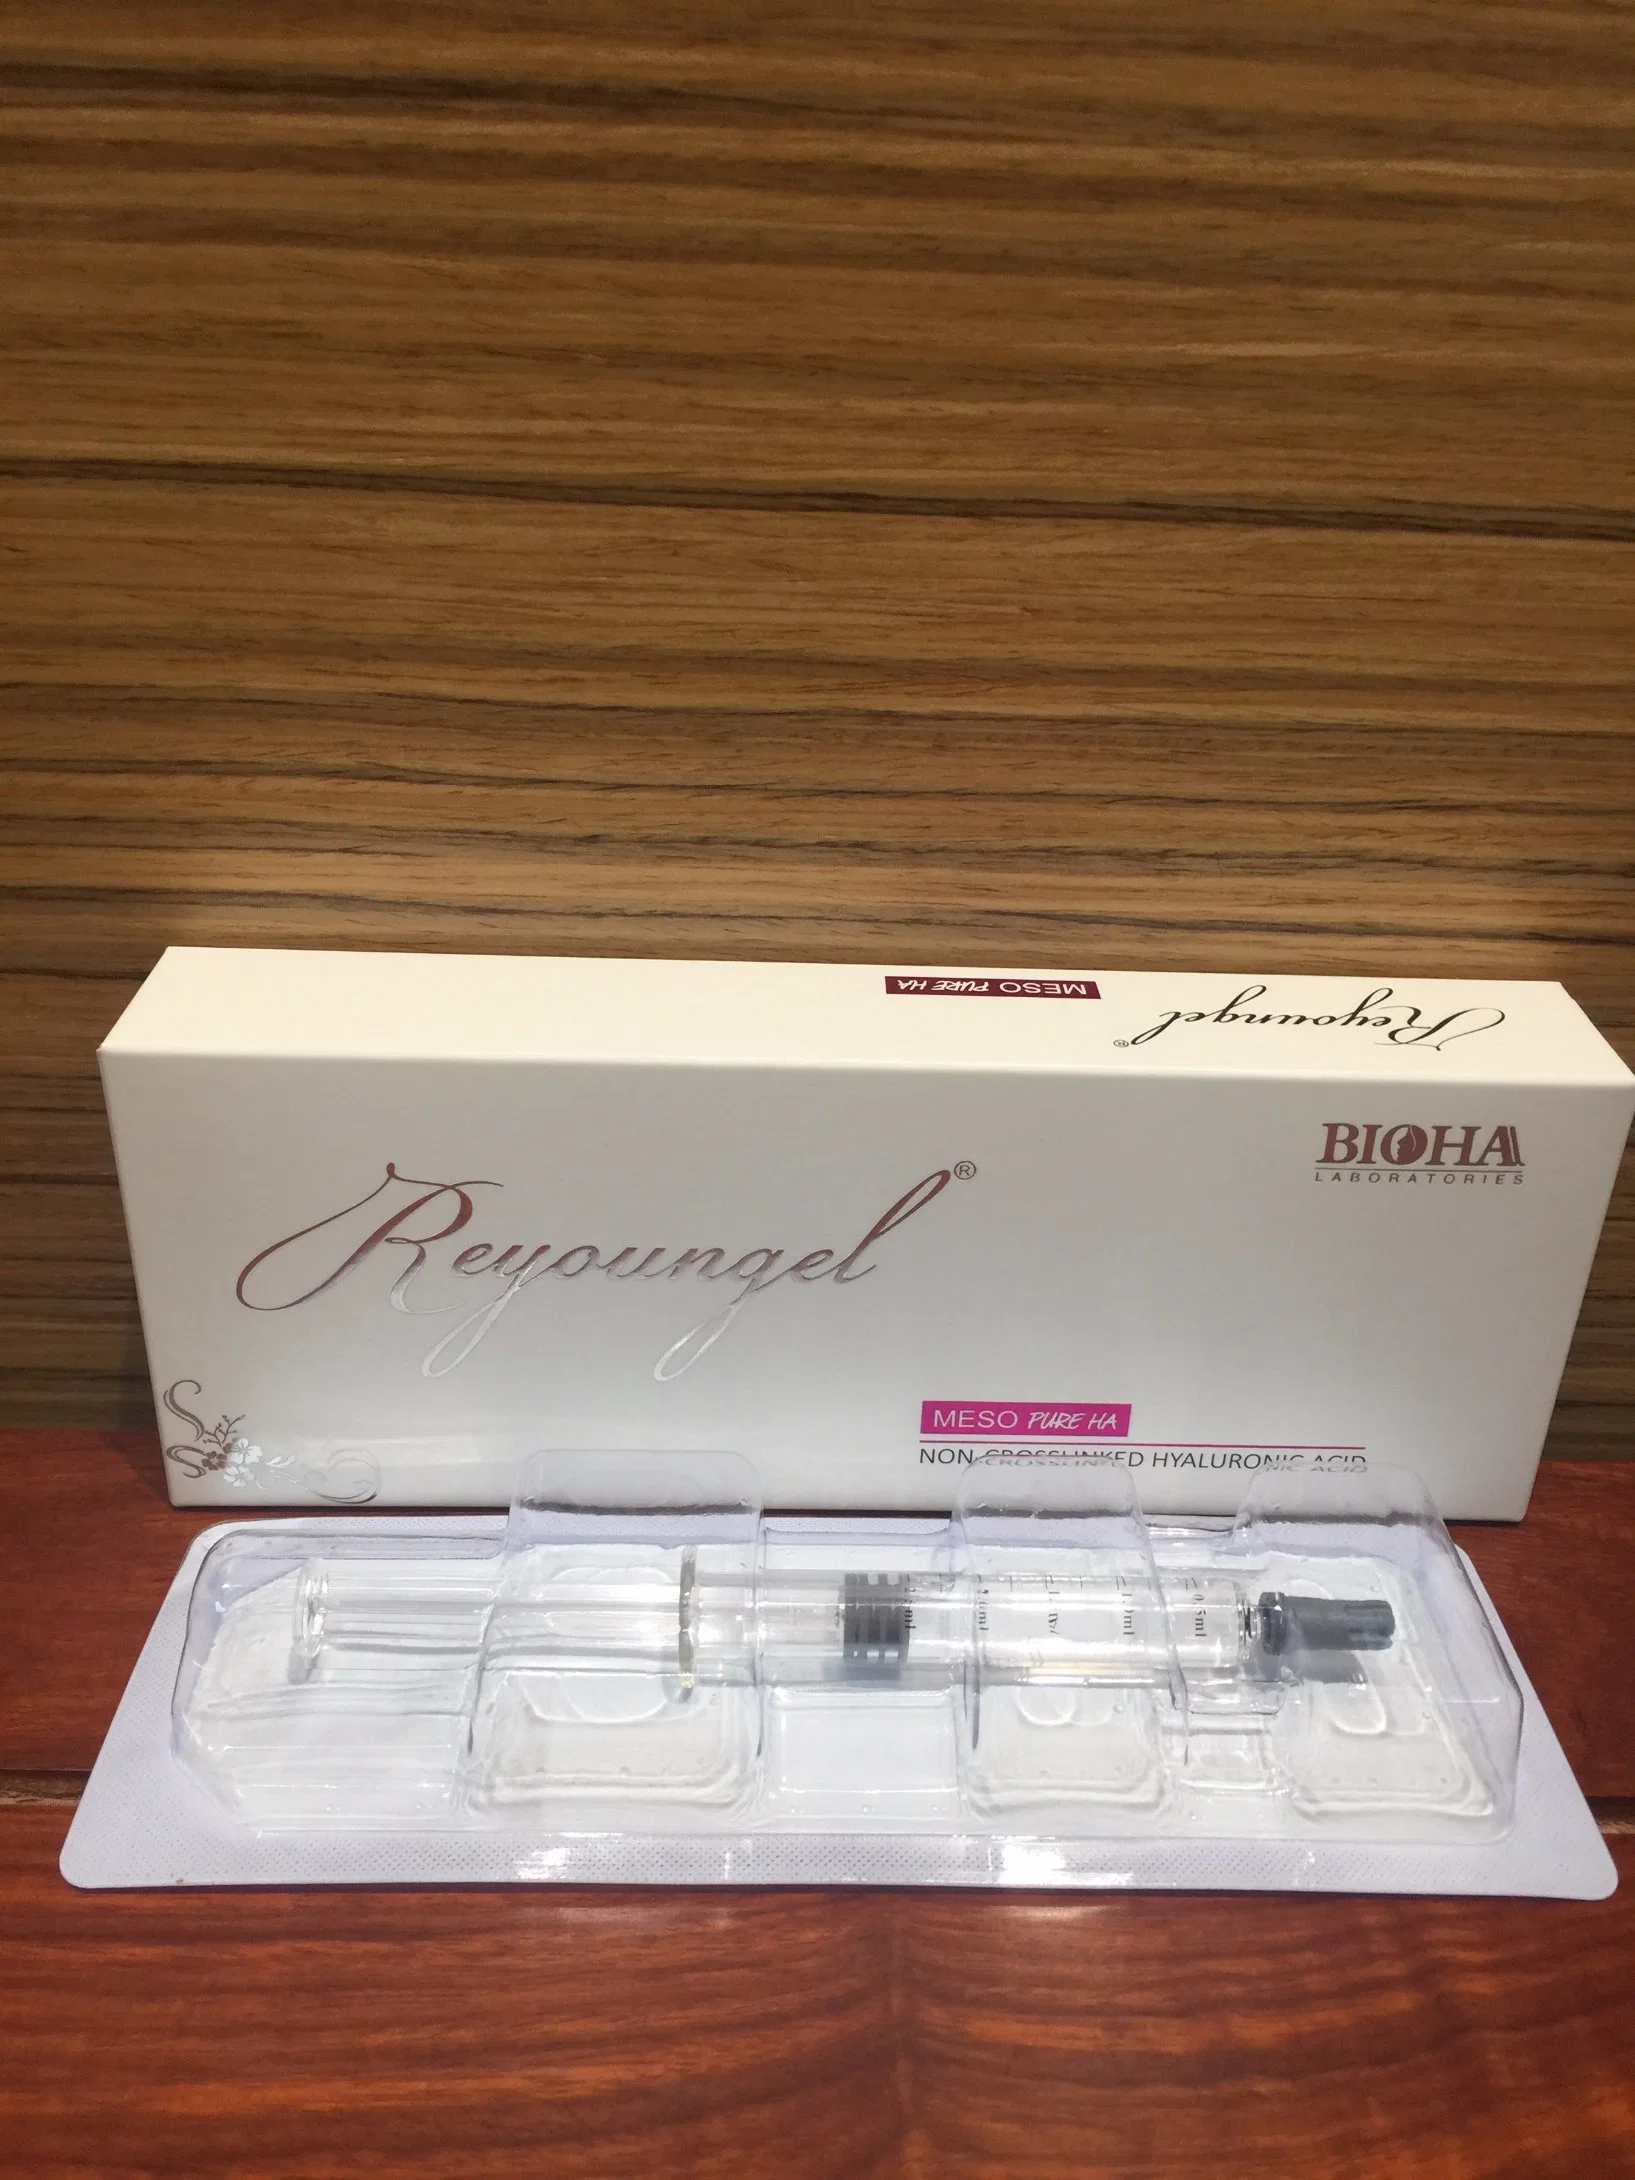 Non Crosslinked Hyaluronic Acid Can Be Injected Ha Solution for Mesotherapy